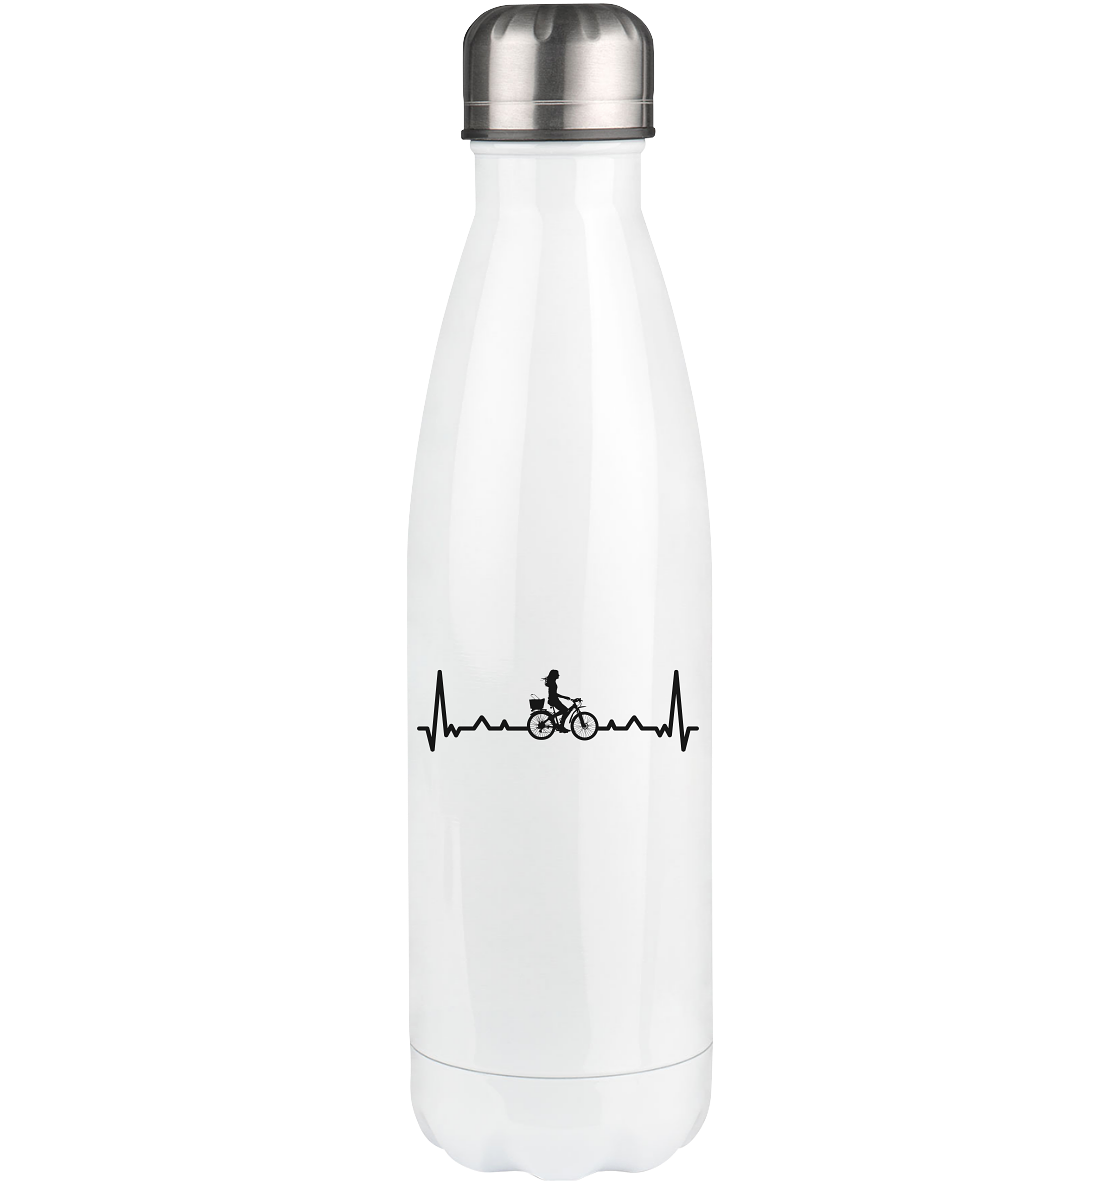 Heartbeat and Cycling - Edelstahl Thermosflasche fahrrad 500ml